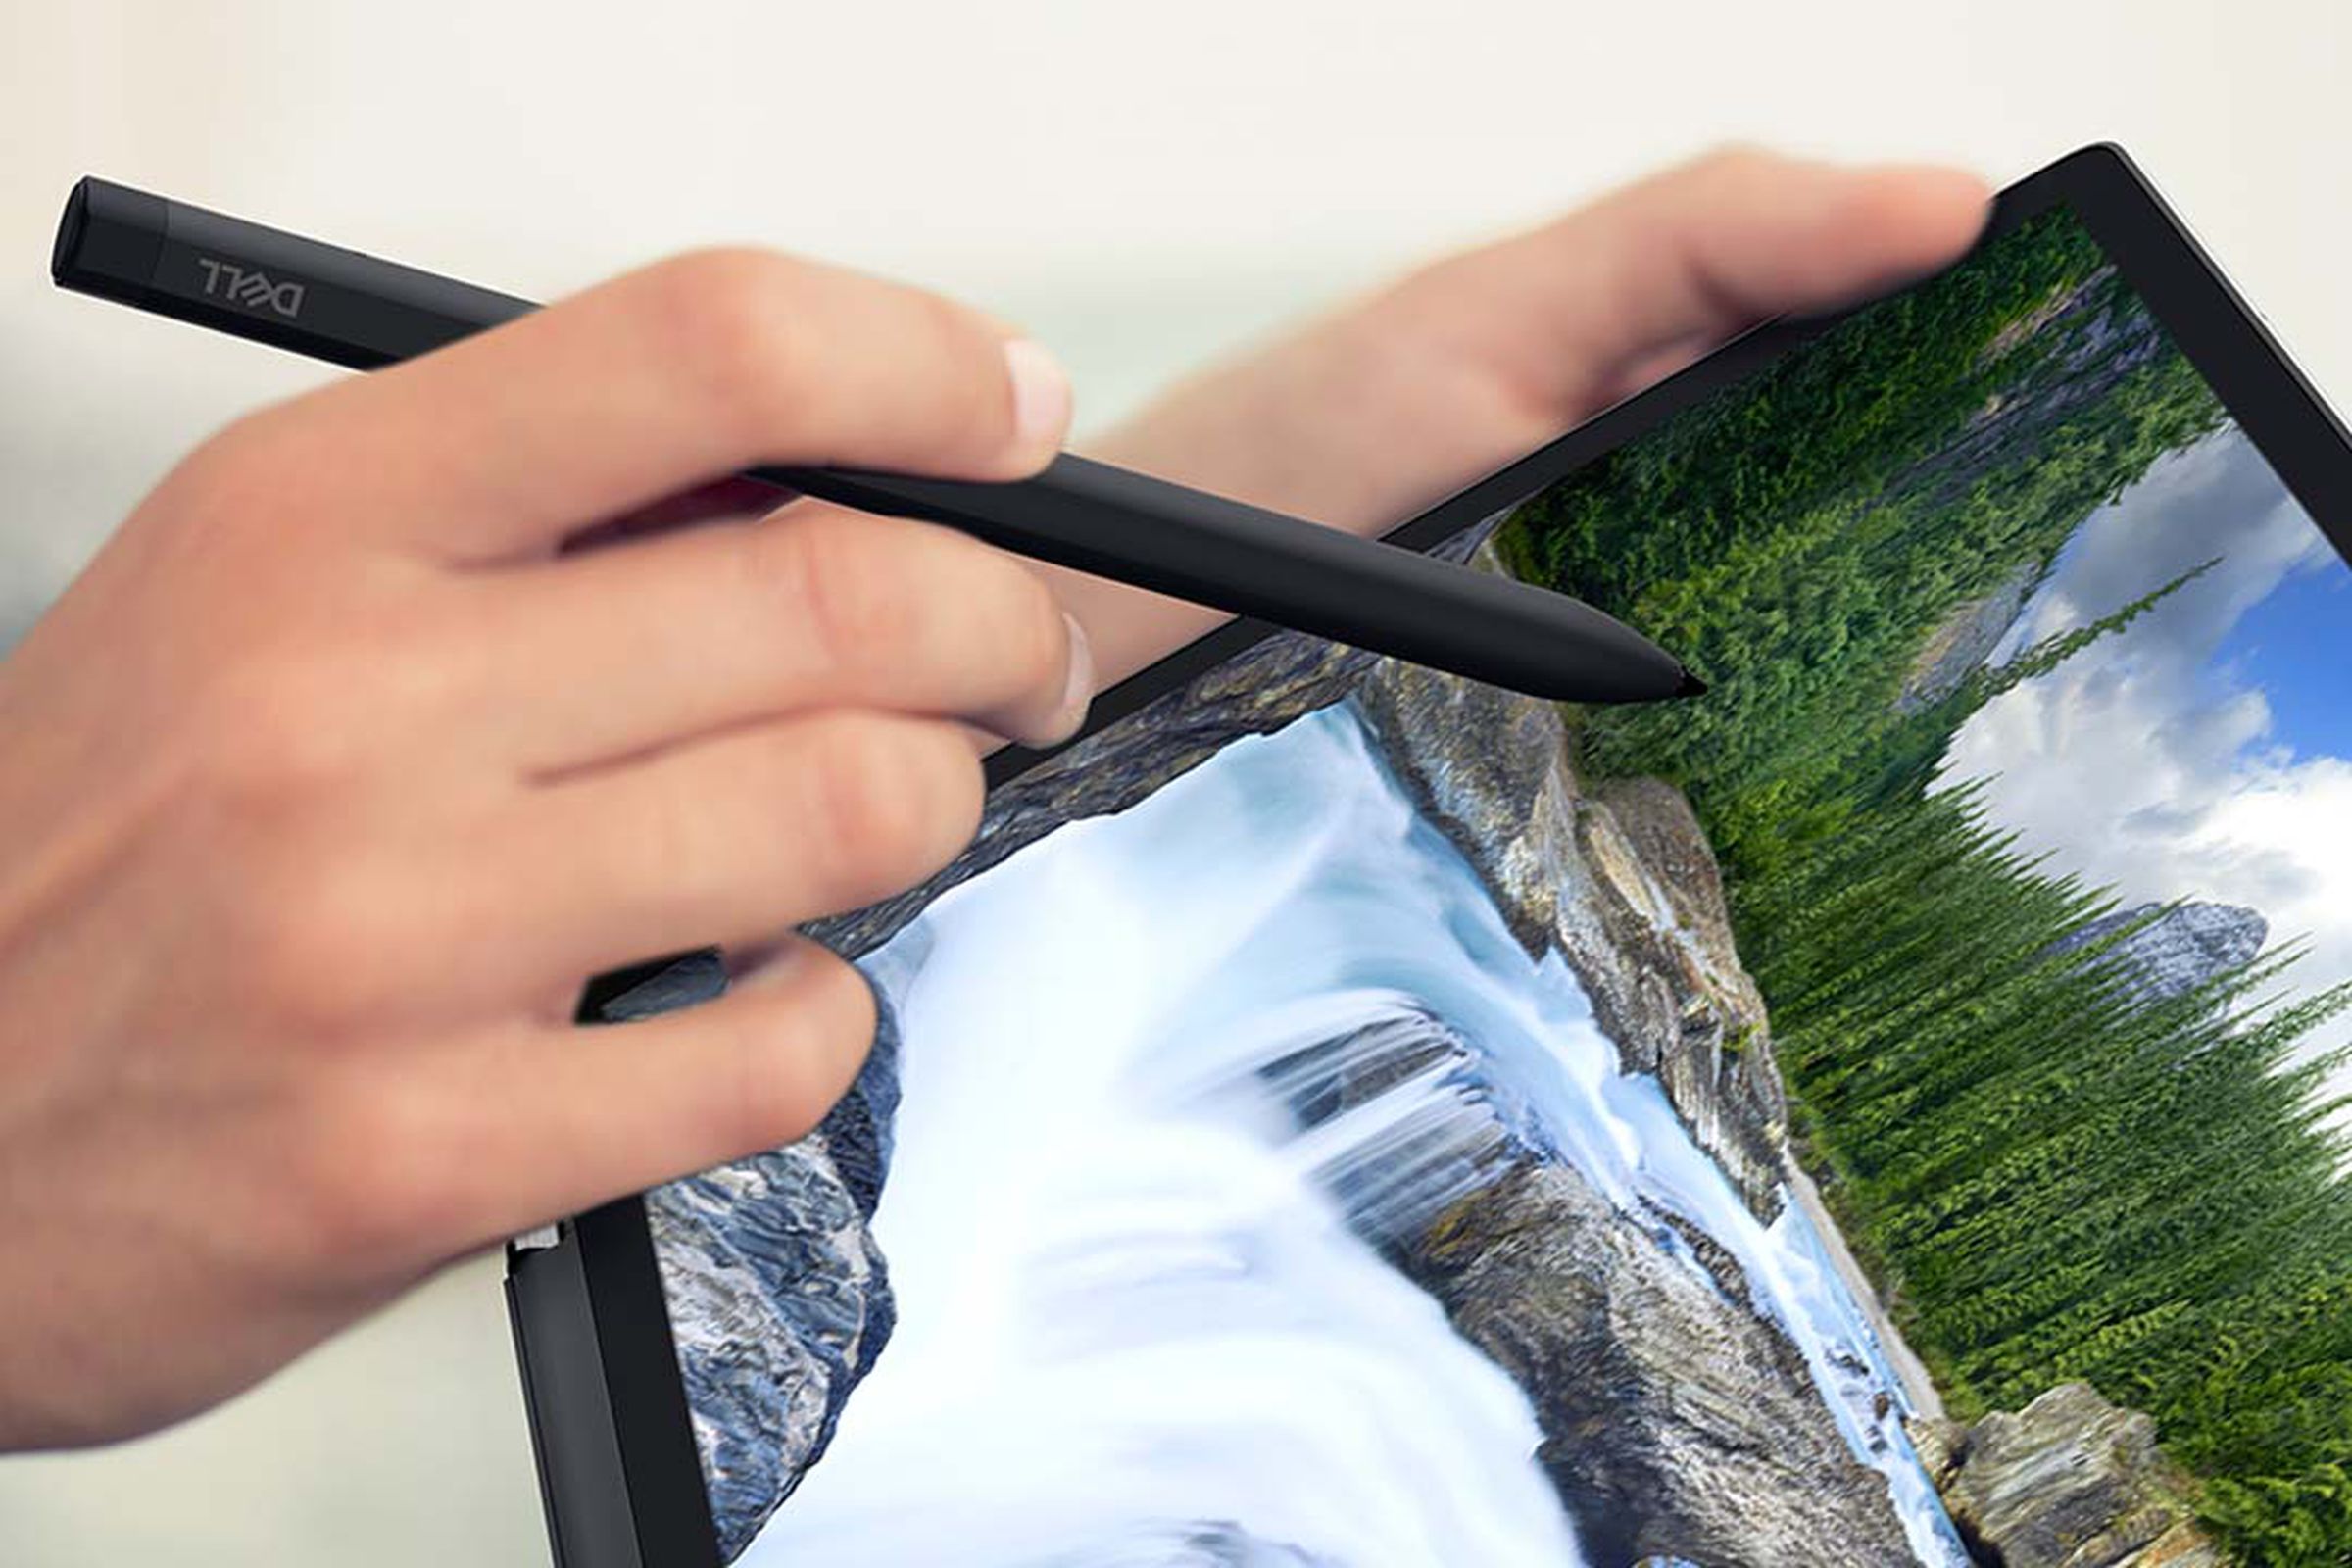 Dell’s new stylus in action.